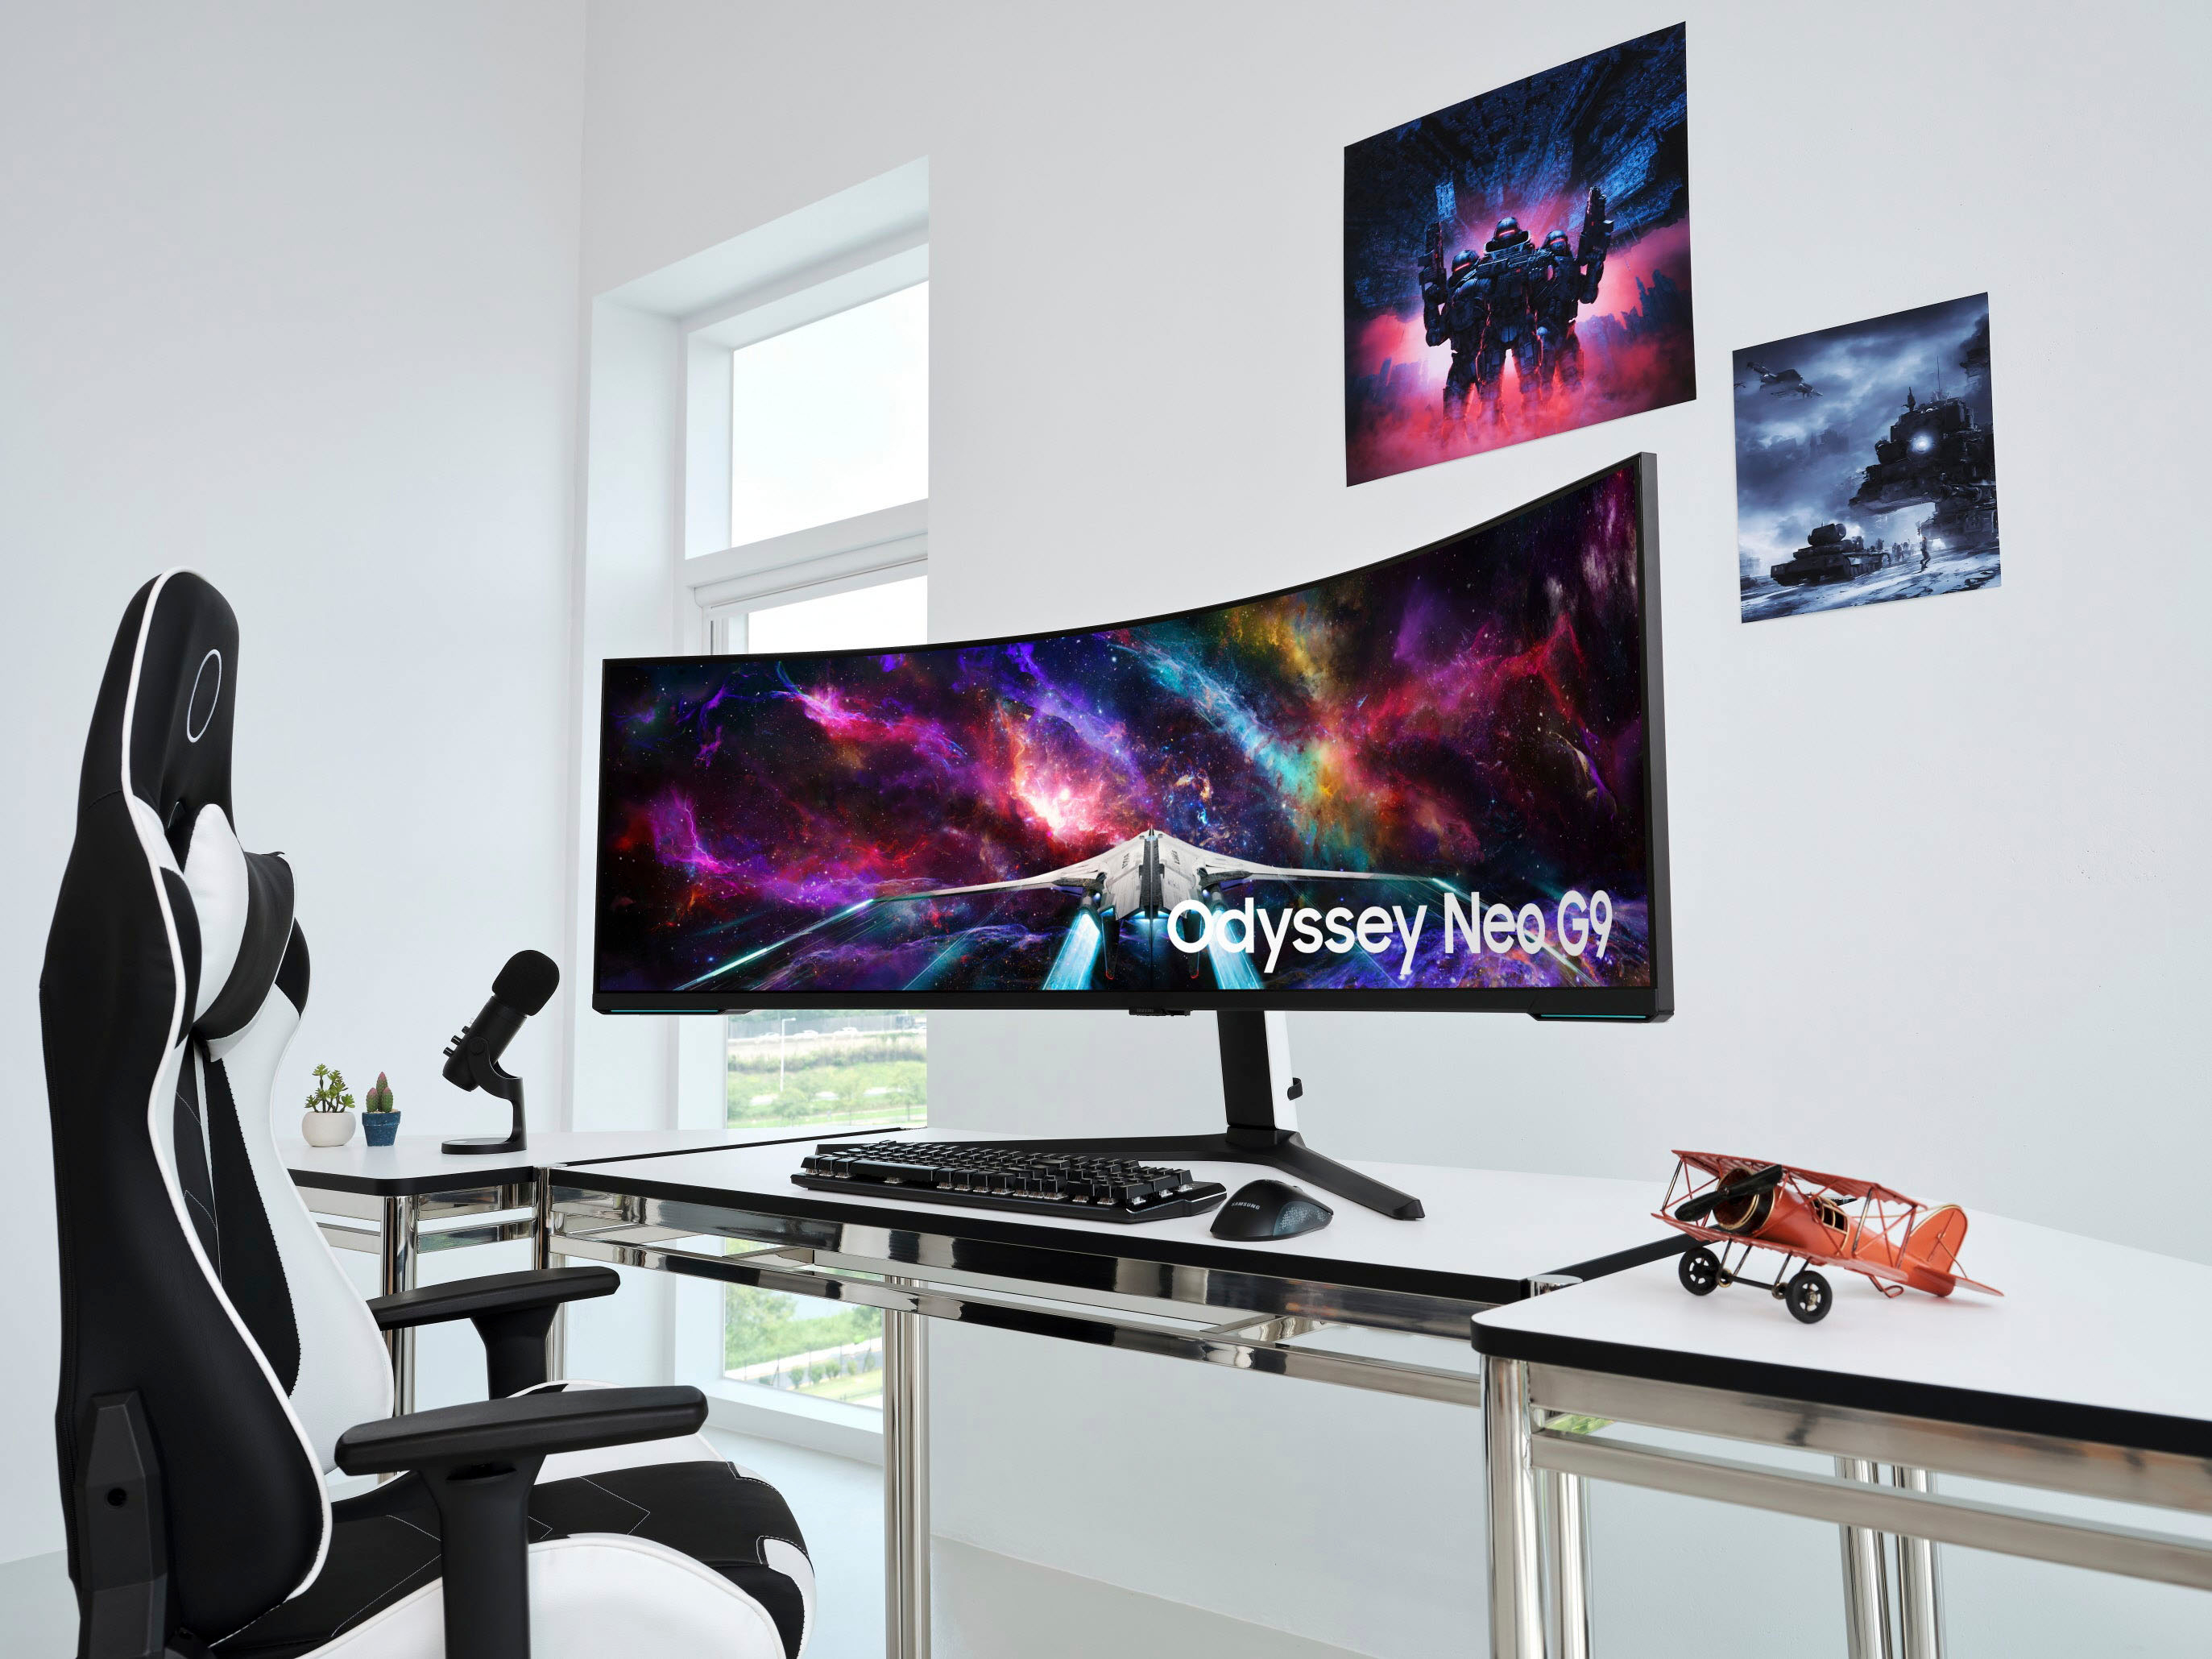 Samsung Odyssey Neo G9 57 Curved Gaming Monitor